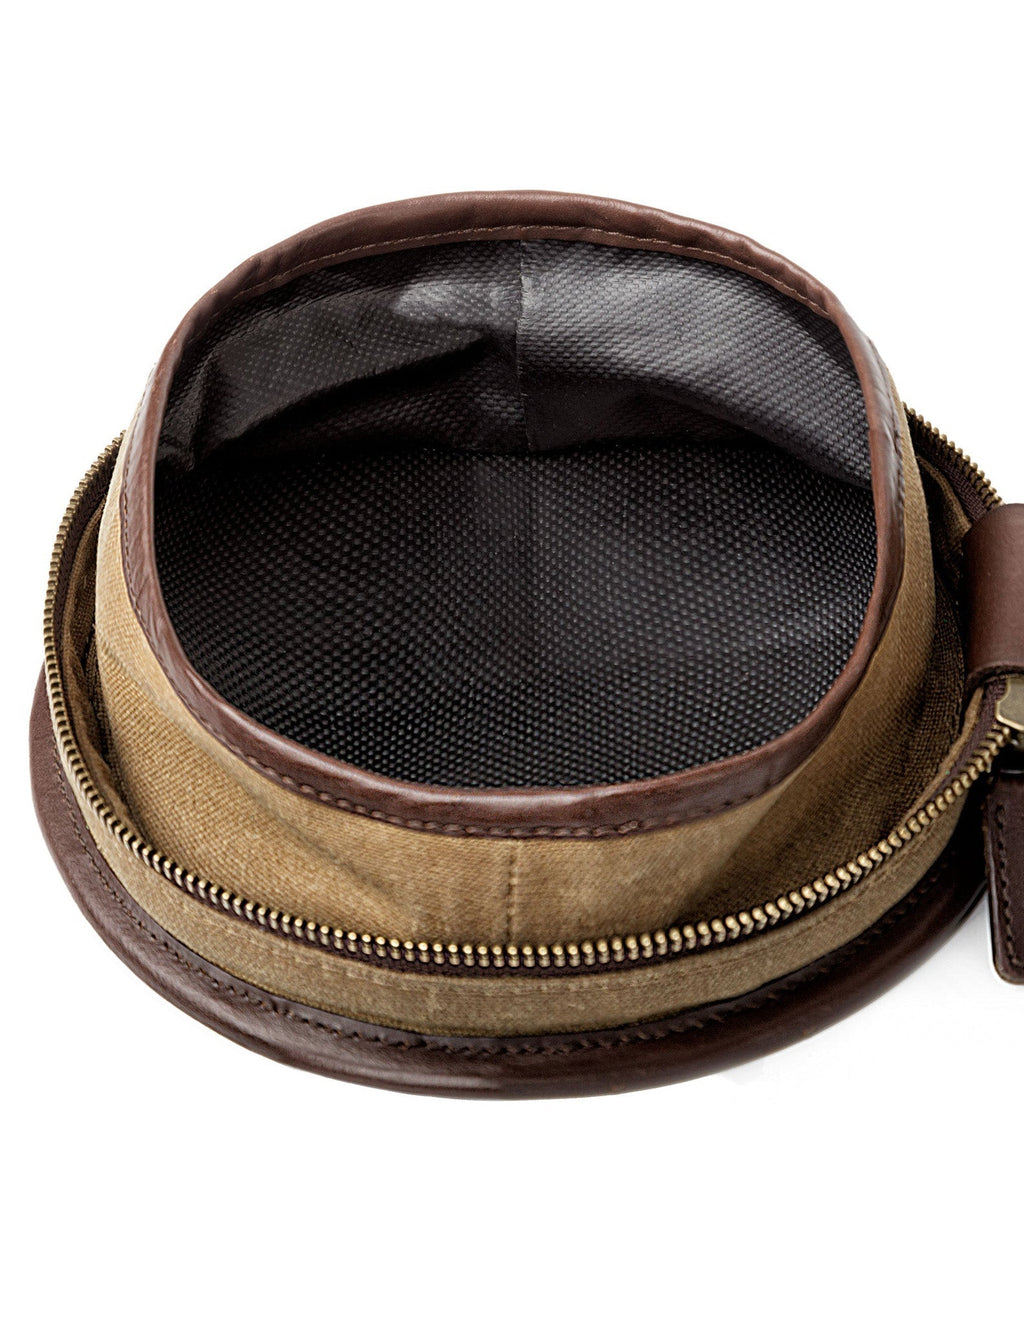 Campaign Waxed Canvas Compact Dog Bow